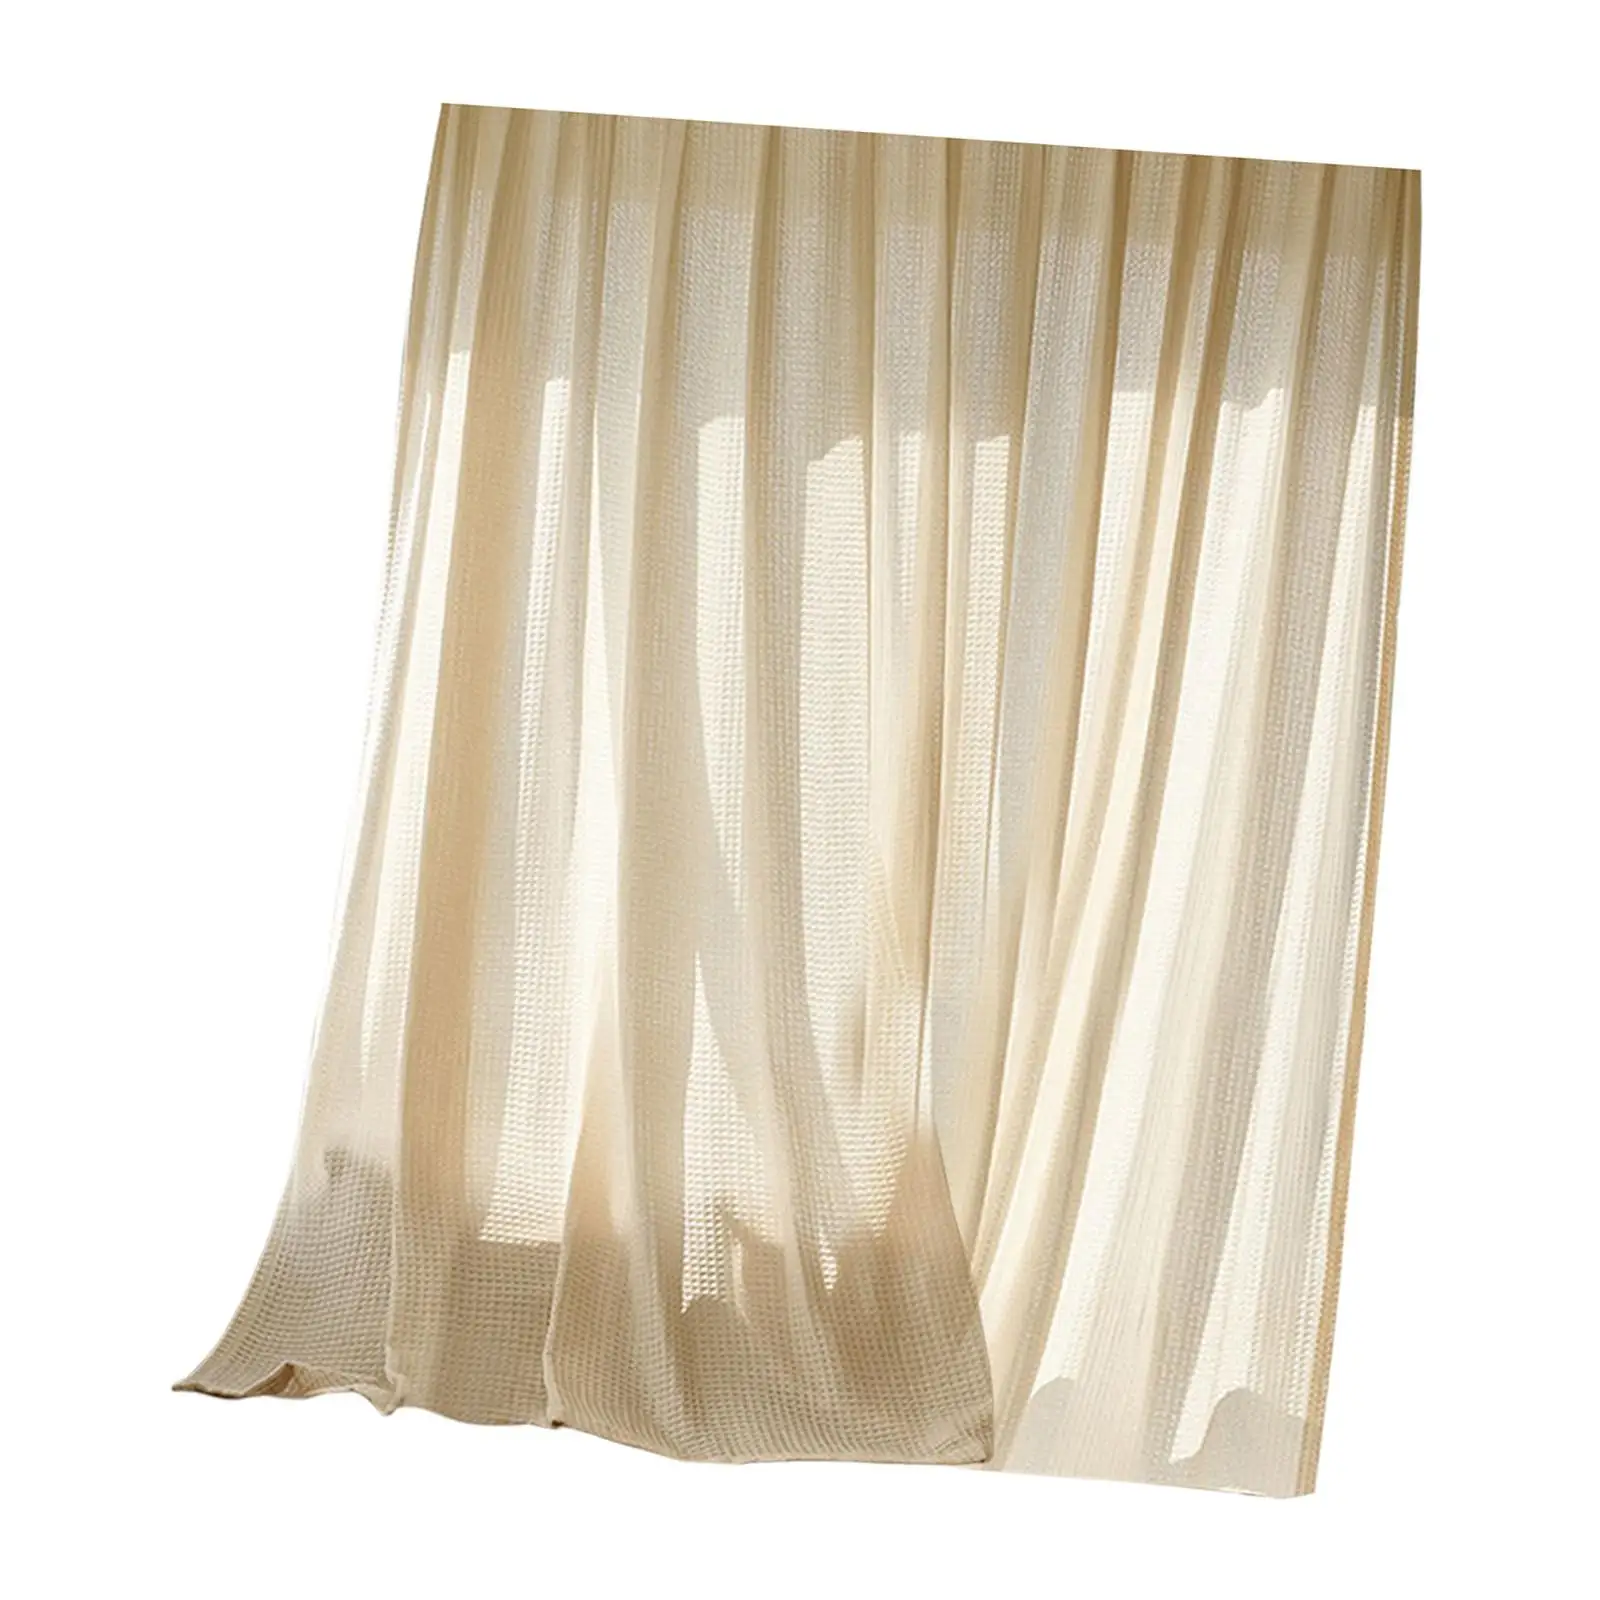 Window Treatment Rustic European Style Draperies Door Curtain Window Curtain for Dining Room Study Bedroom Office Decoration